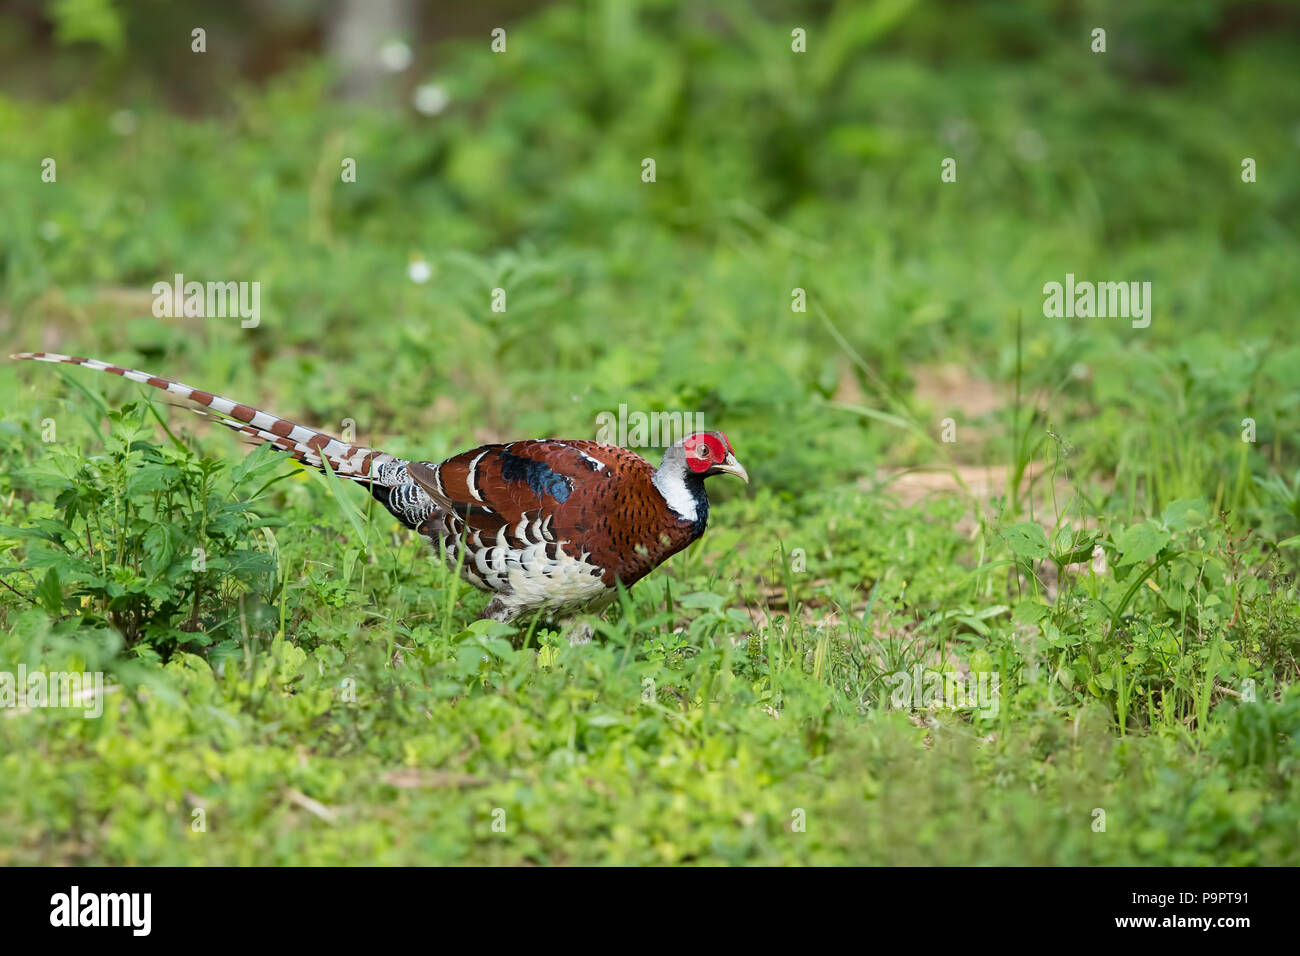 Elliot's Pheasant is a very shy yet beautiful bird which is endemic to China. This Adult male was photographed at dusk in Fujian province. Stock Photo